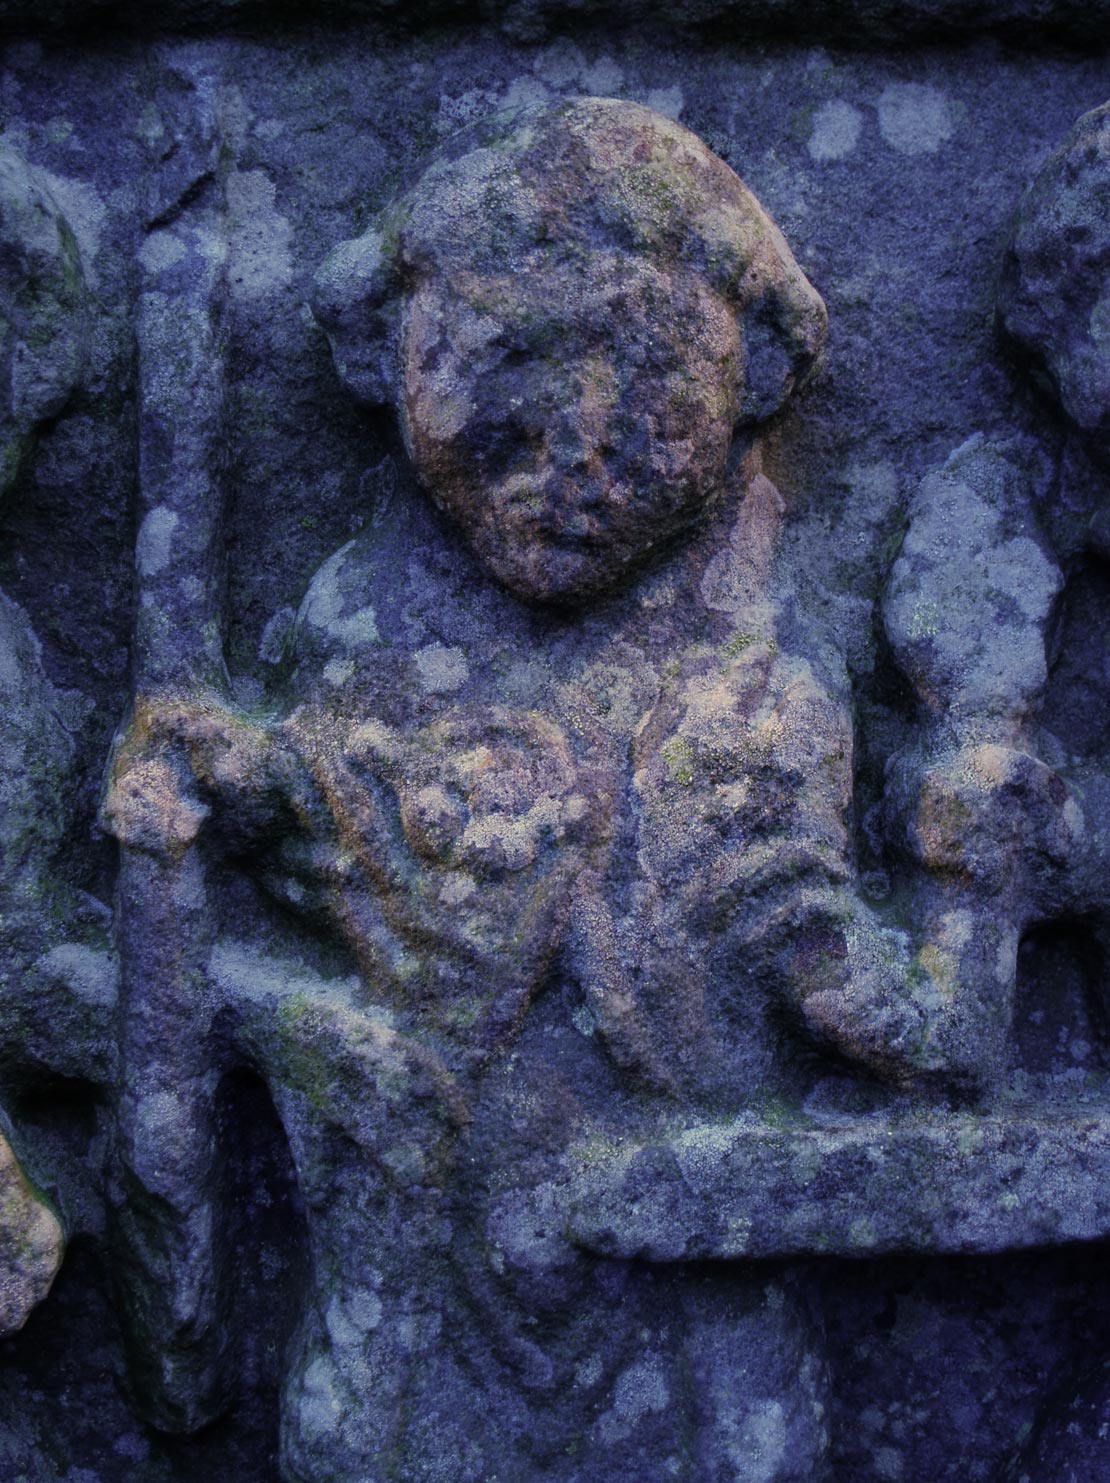 The figure of Christ being arrested in Gethsemane, as depicted on the 10th century High-Cross in Monasterboice, Co. Louth. The arresting Romans are shown as Vikings,suggesting a Scandinavian sculptor, perhaps from nearby Anagassan.